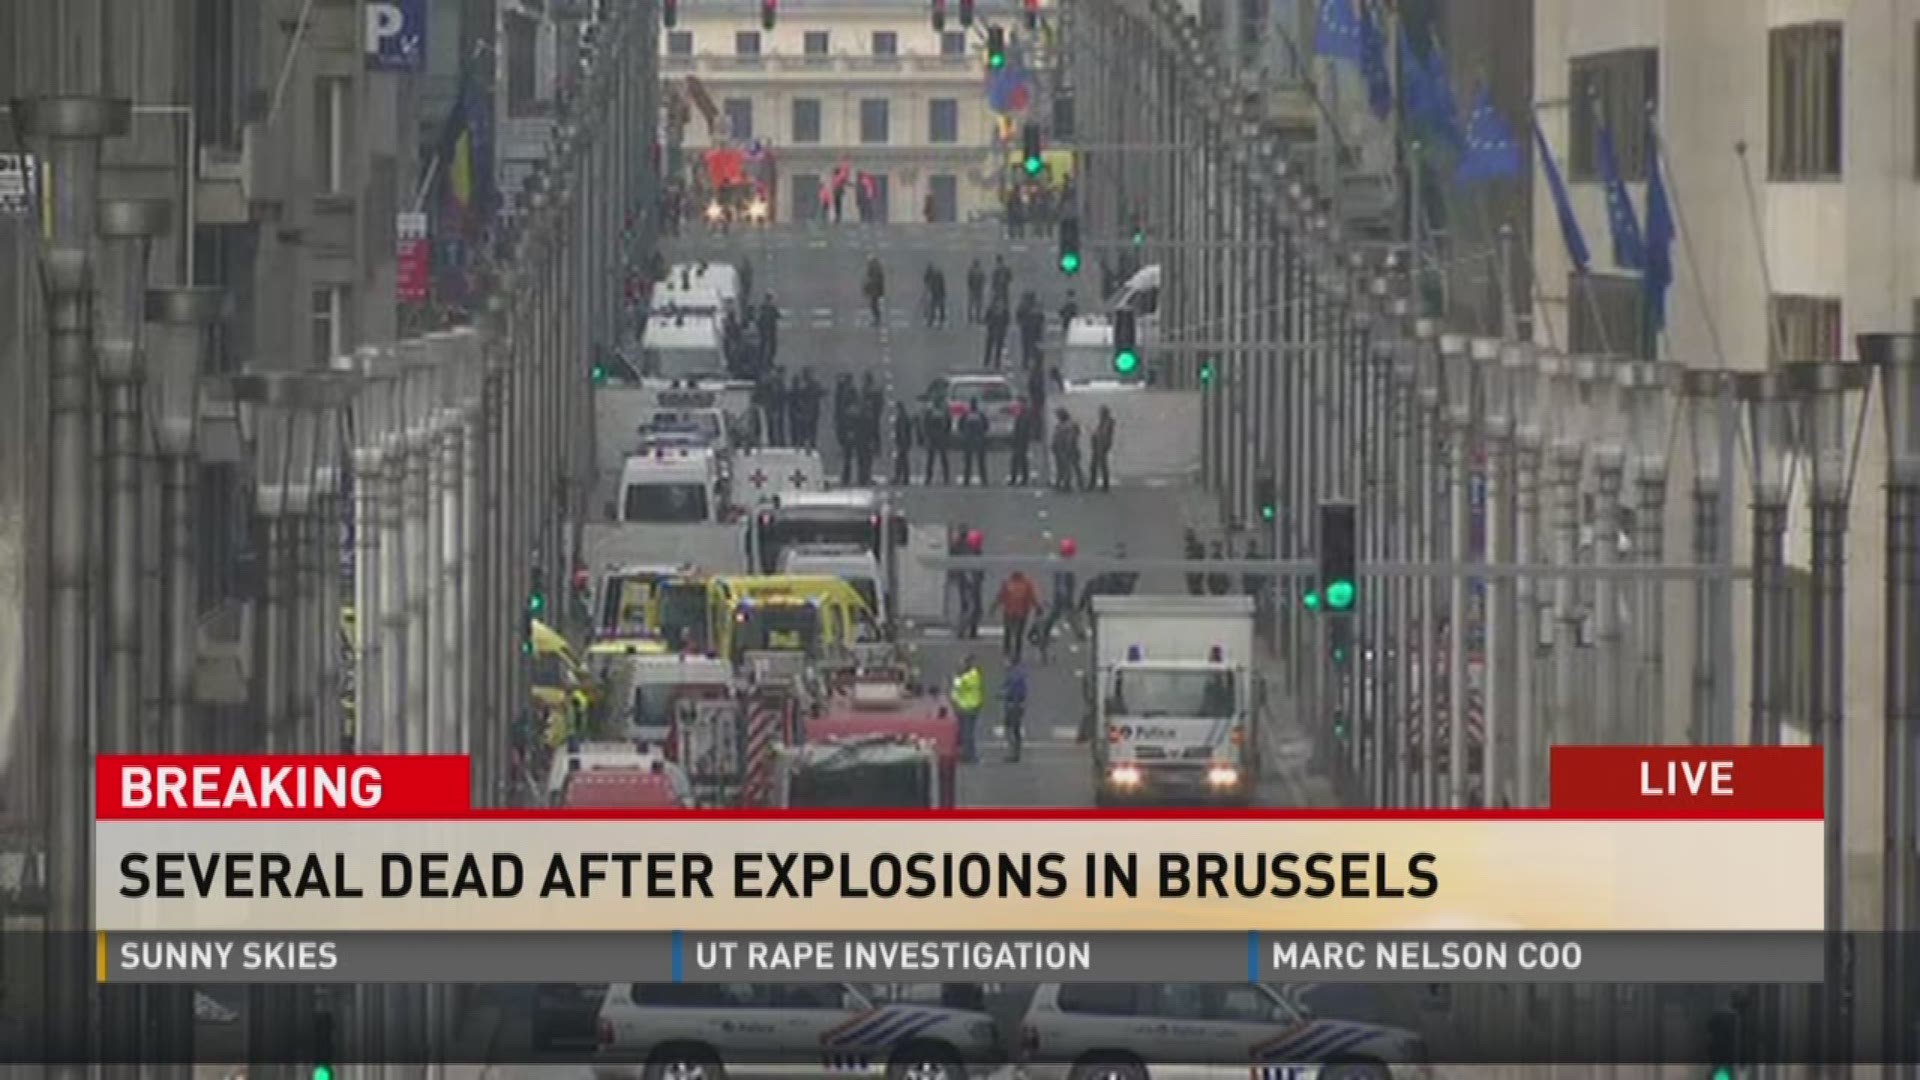 There were two explosions in Brussels on Tuesday.